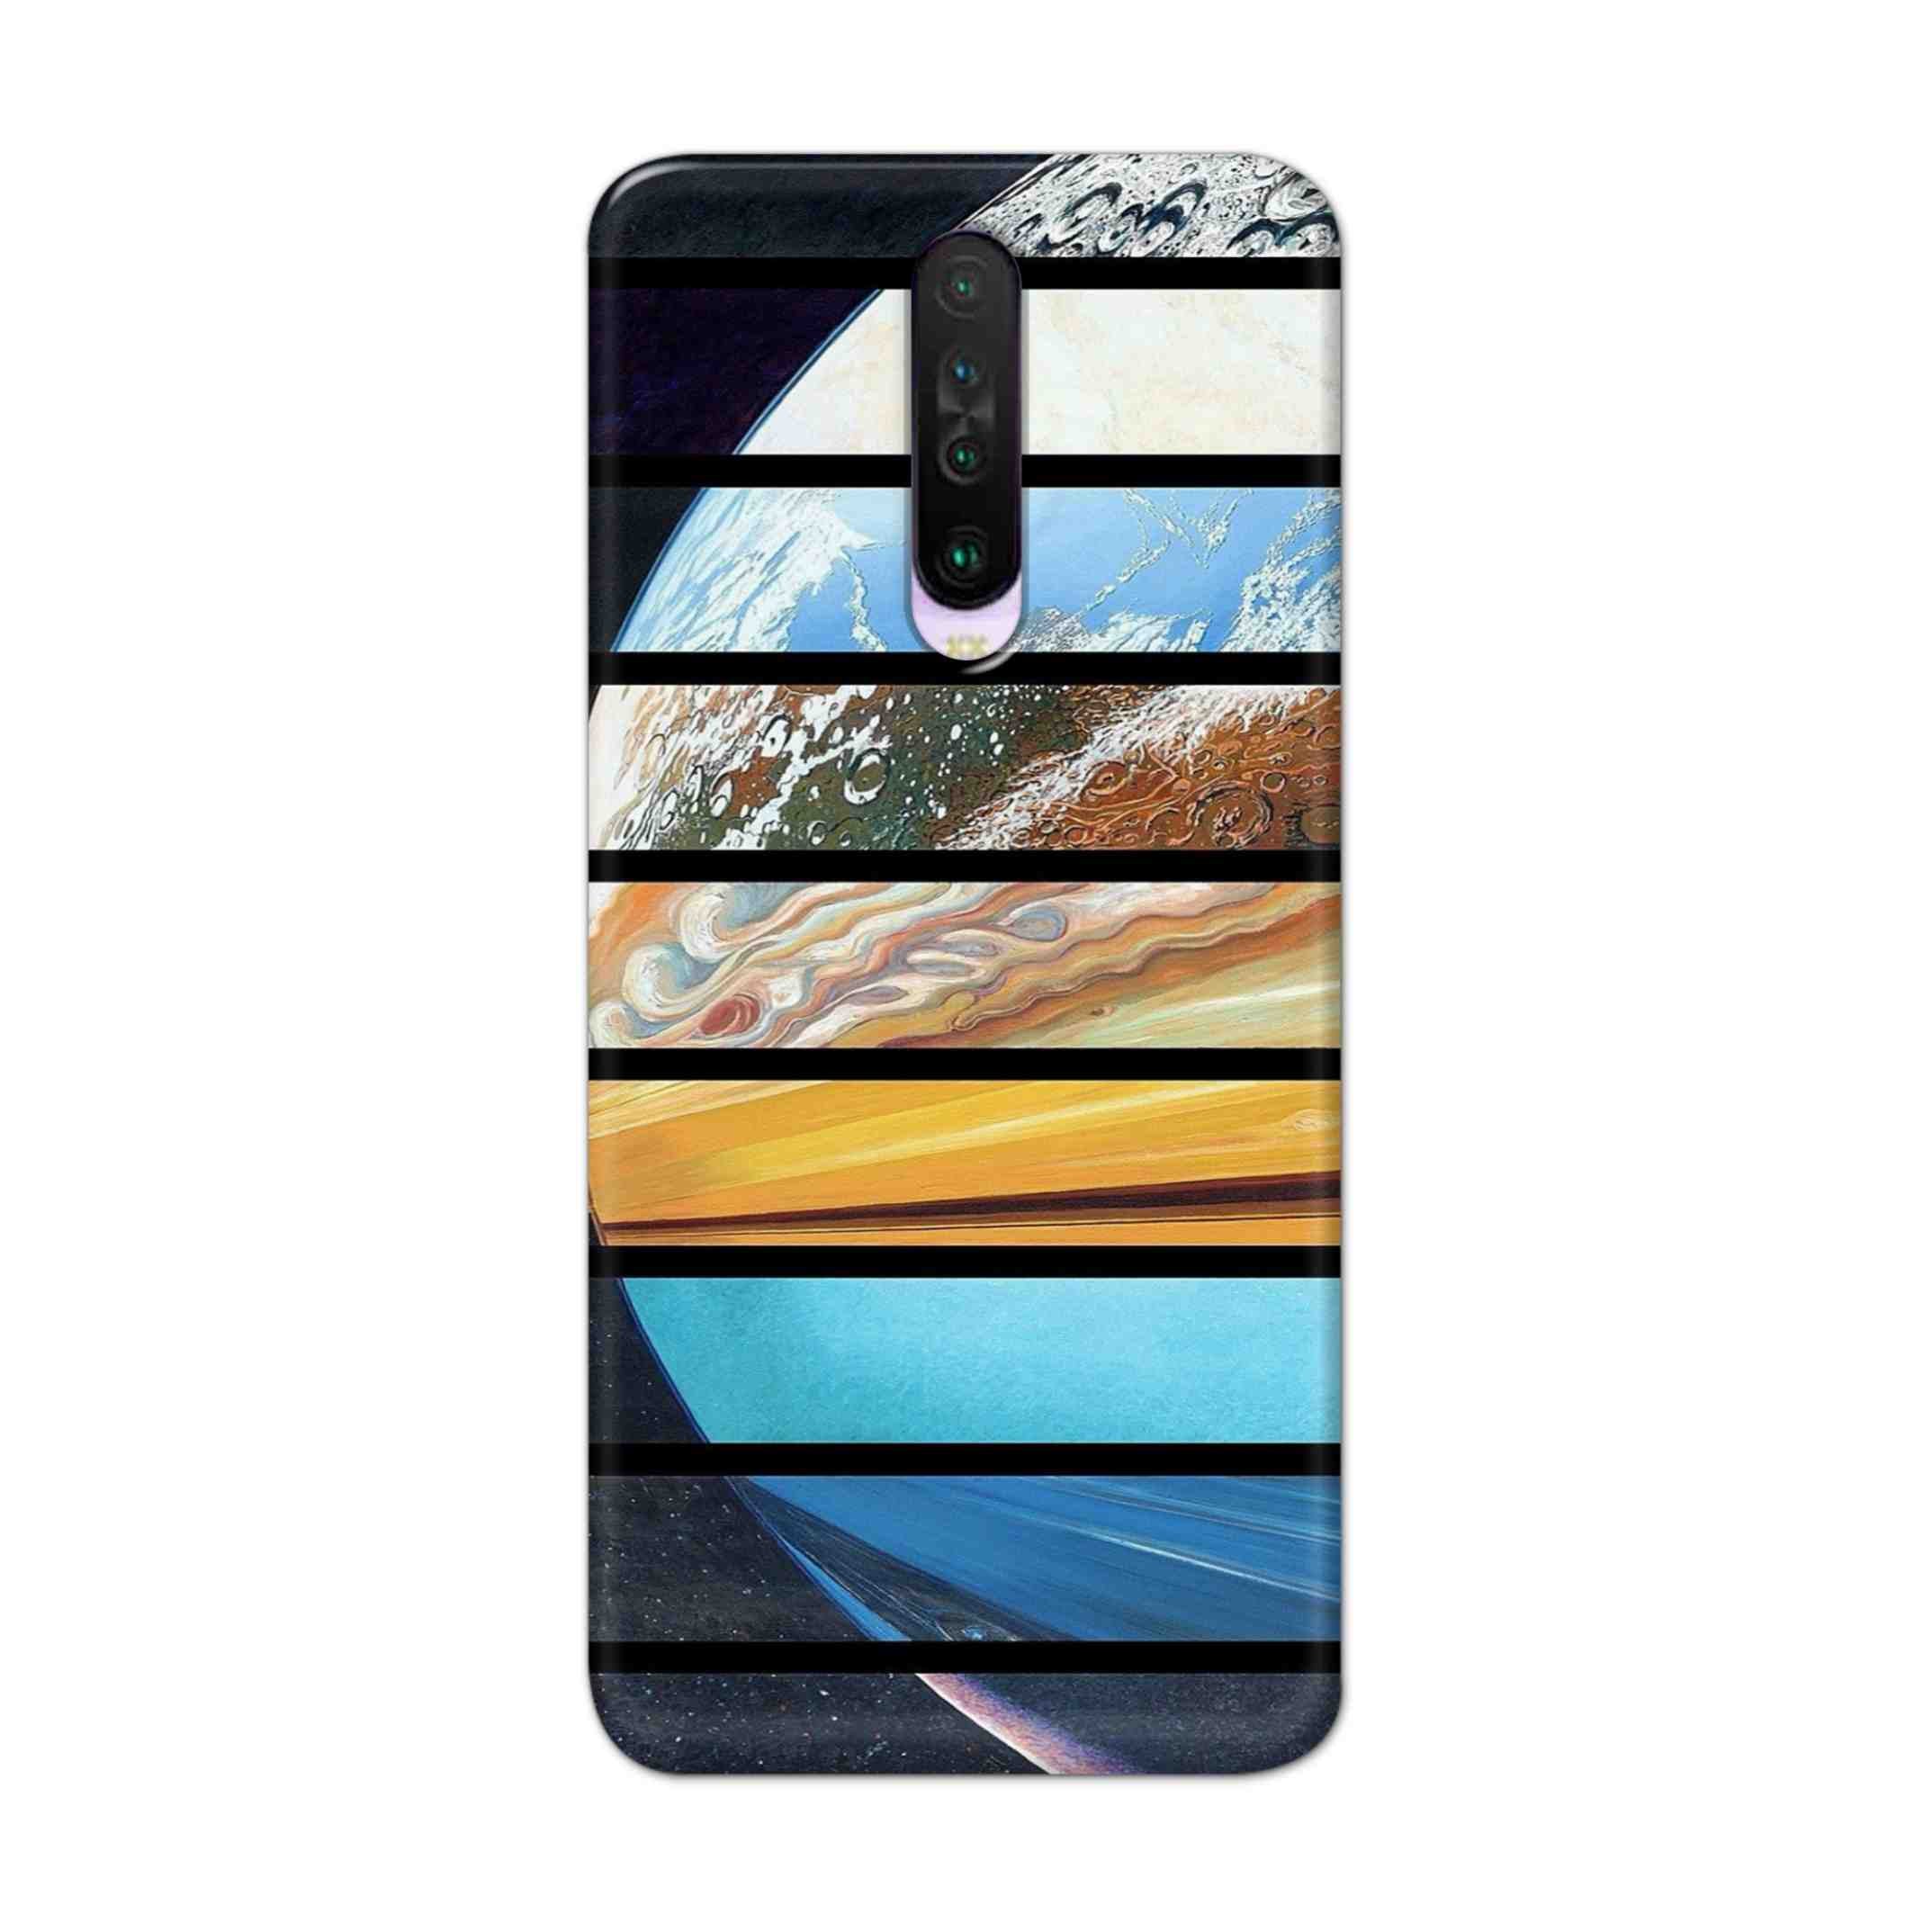 Buy Colourful Earth Hard Back Mobile Phone Case Cover For Poco X2 Online